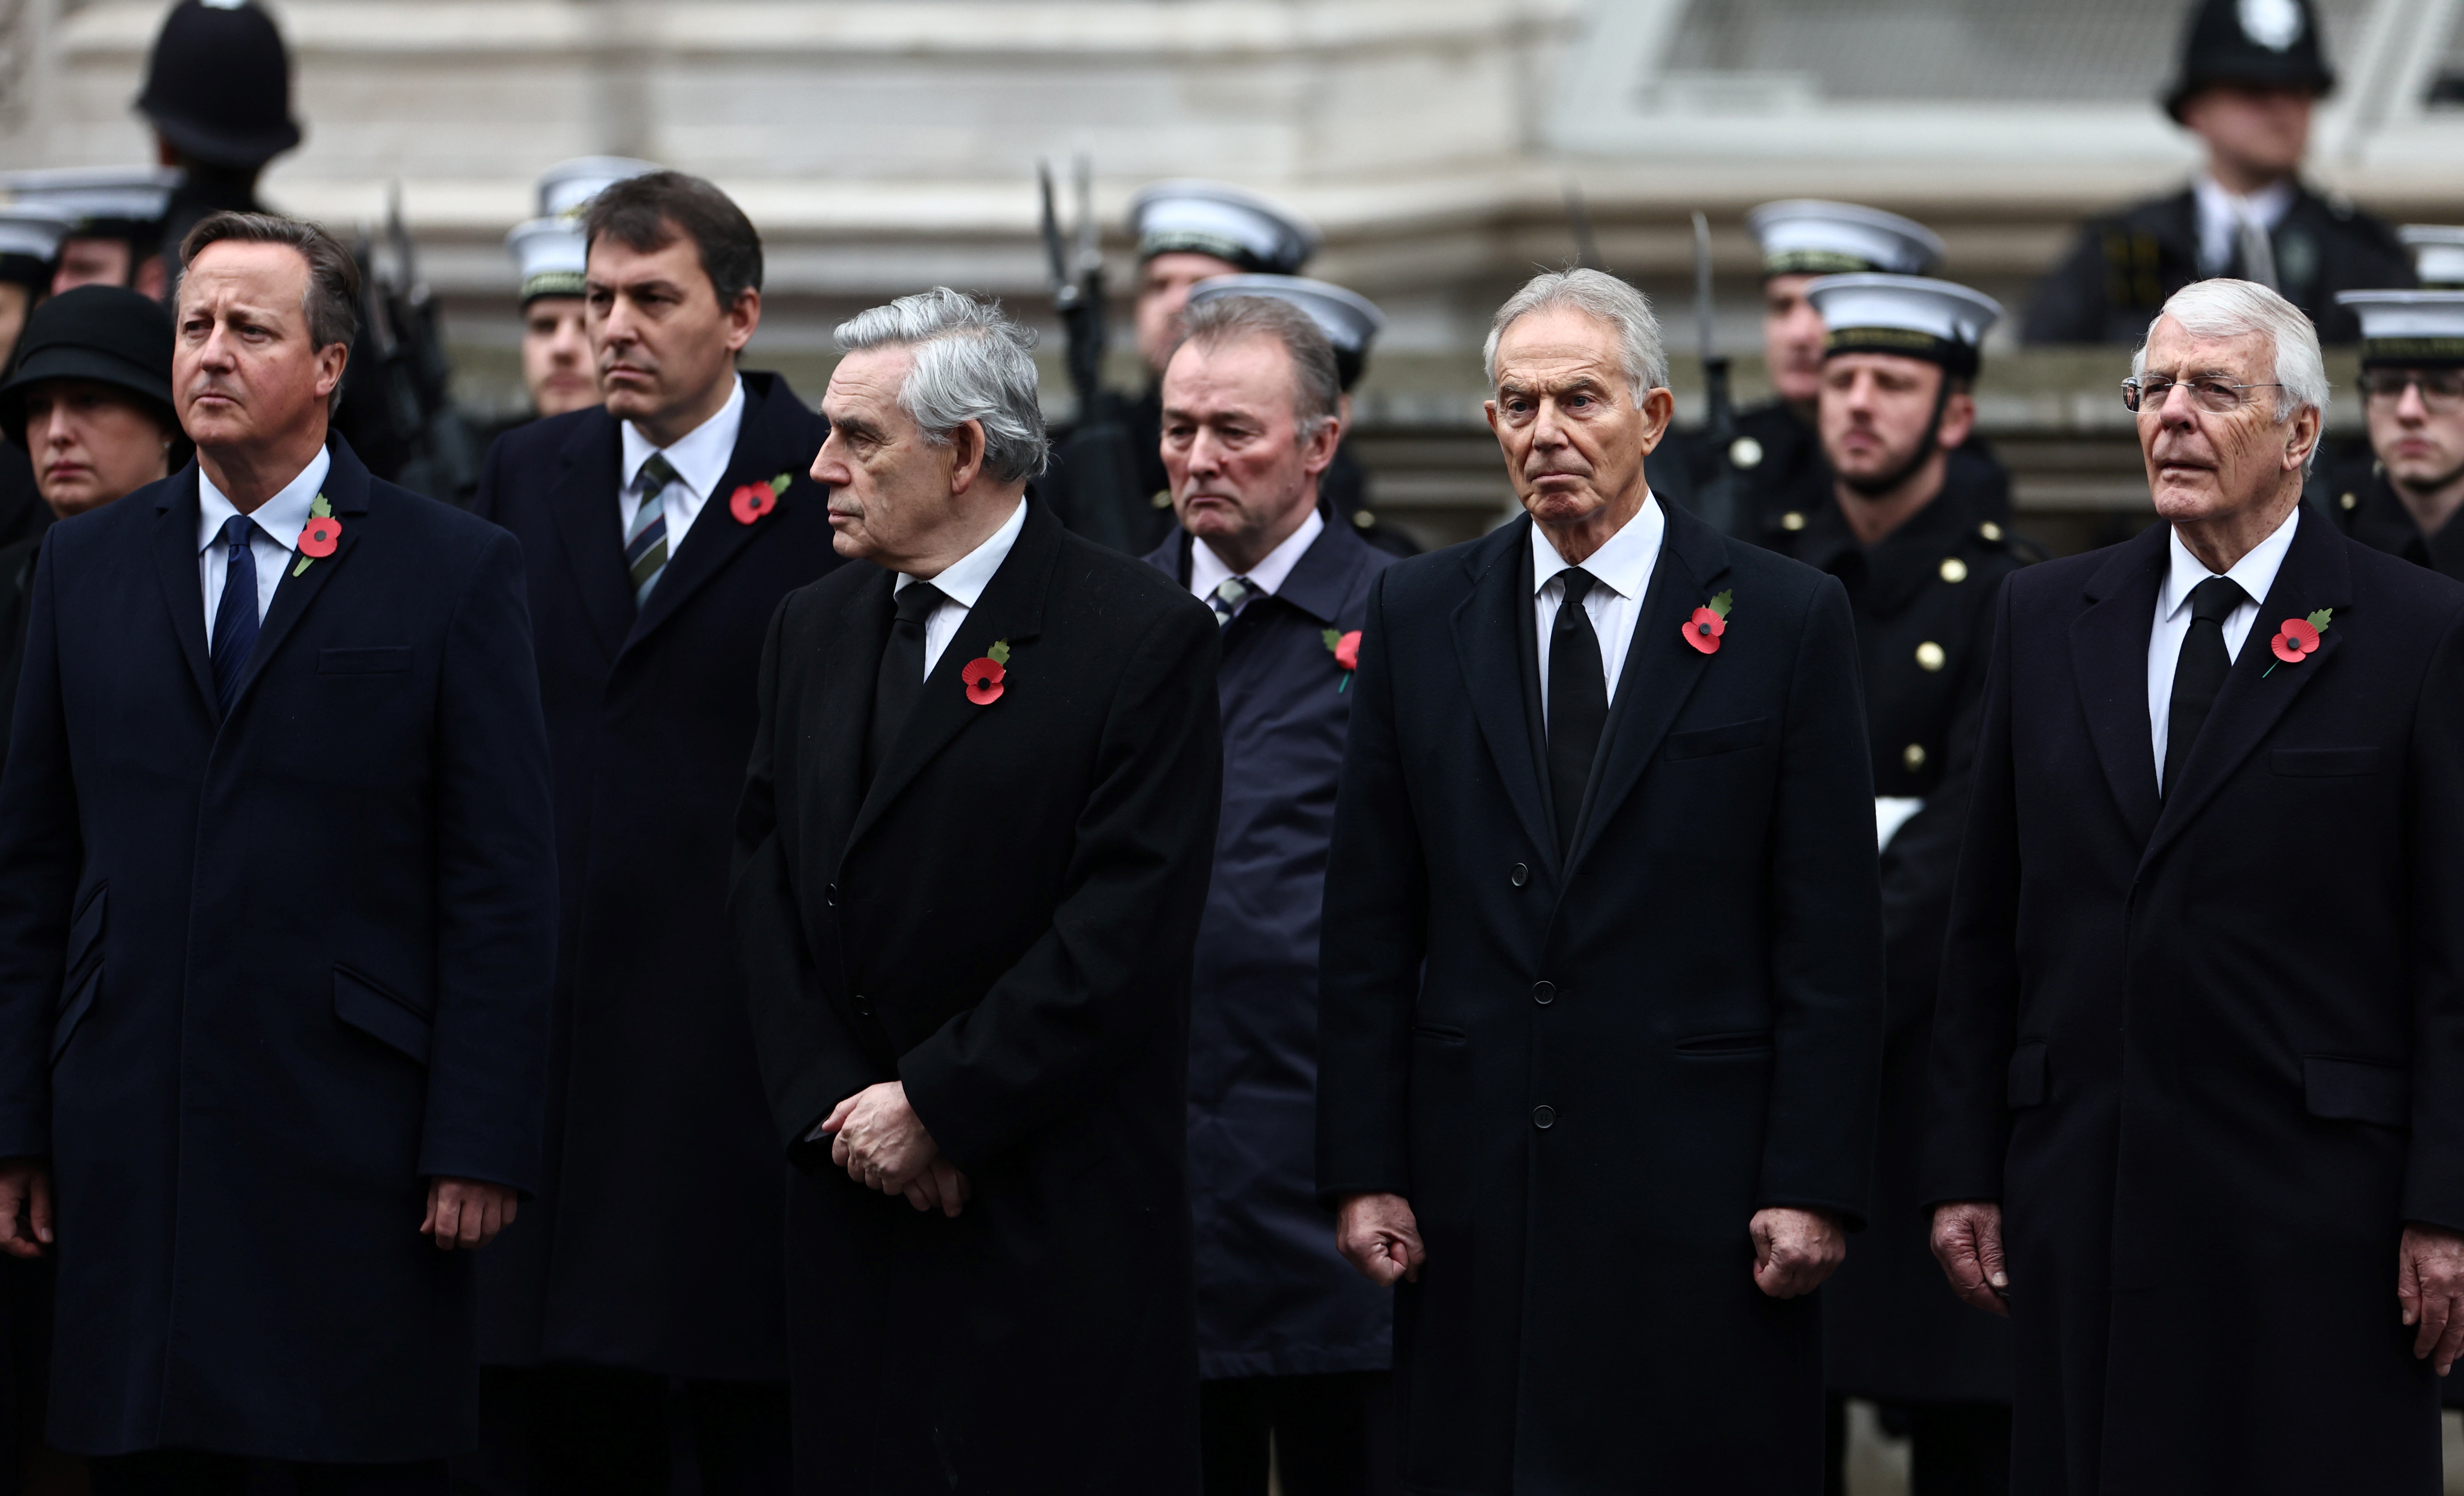 Former prime ministers David Cameron, Gordon Brown, Tony Blair and John Major attend the Remembrance Sunday ceremony at the Cenotaph